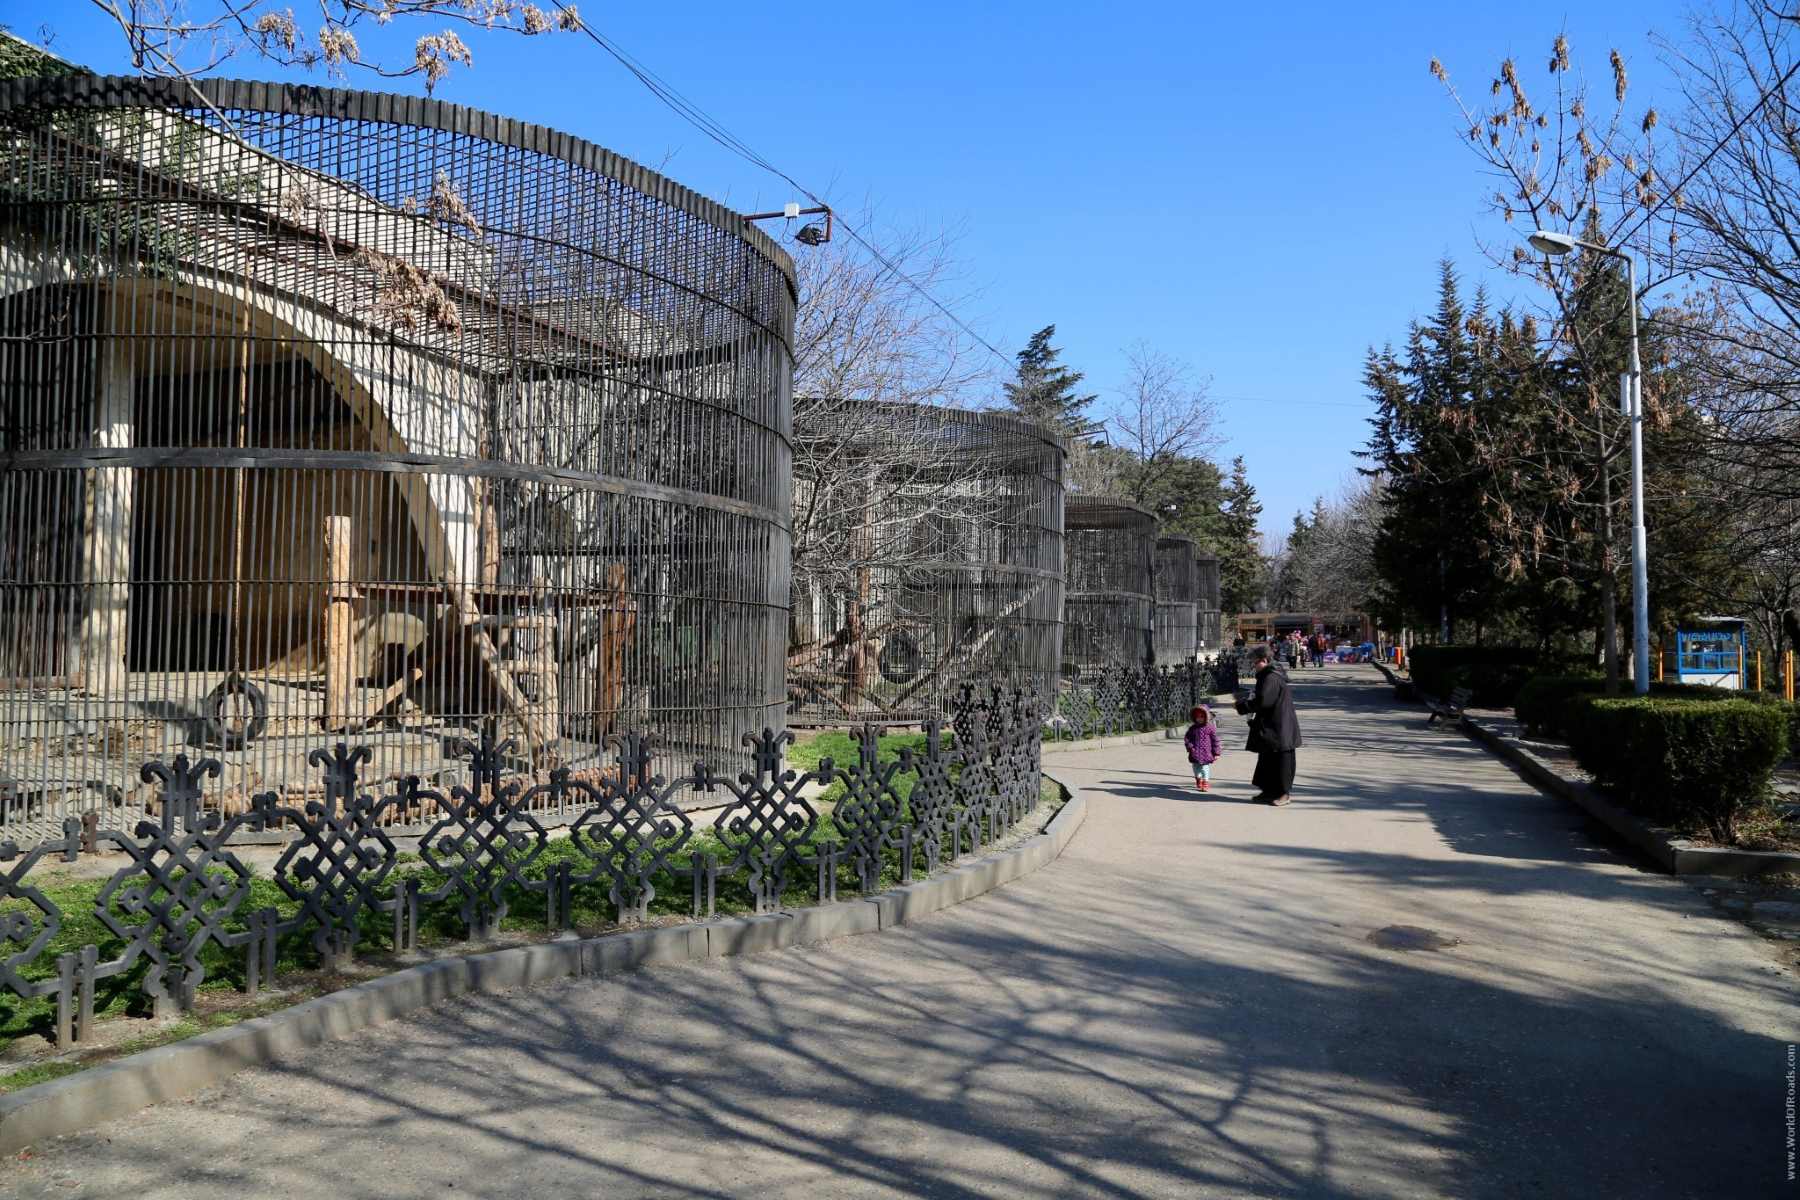 15-astonishing-facts-about-tbilisi-zoo